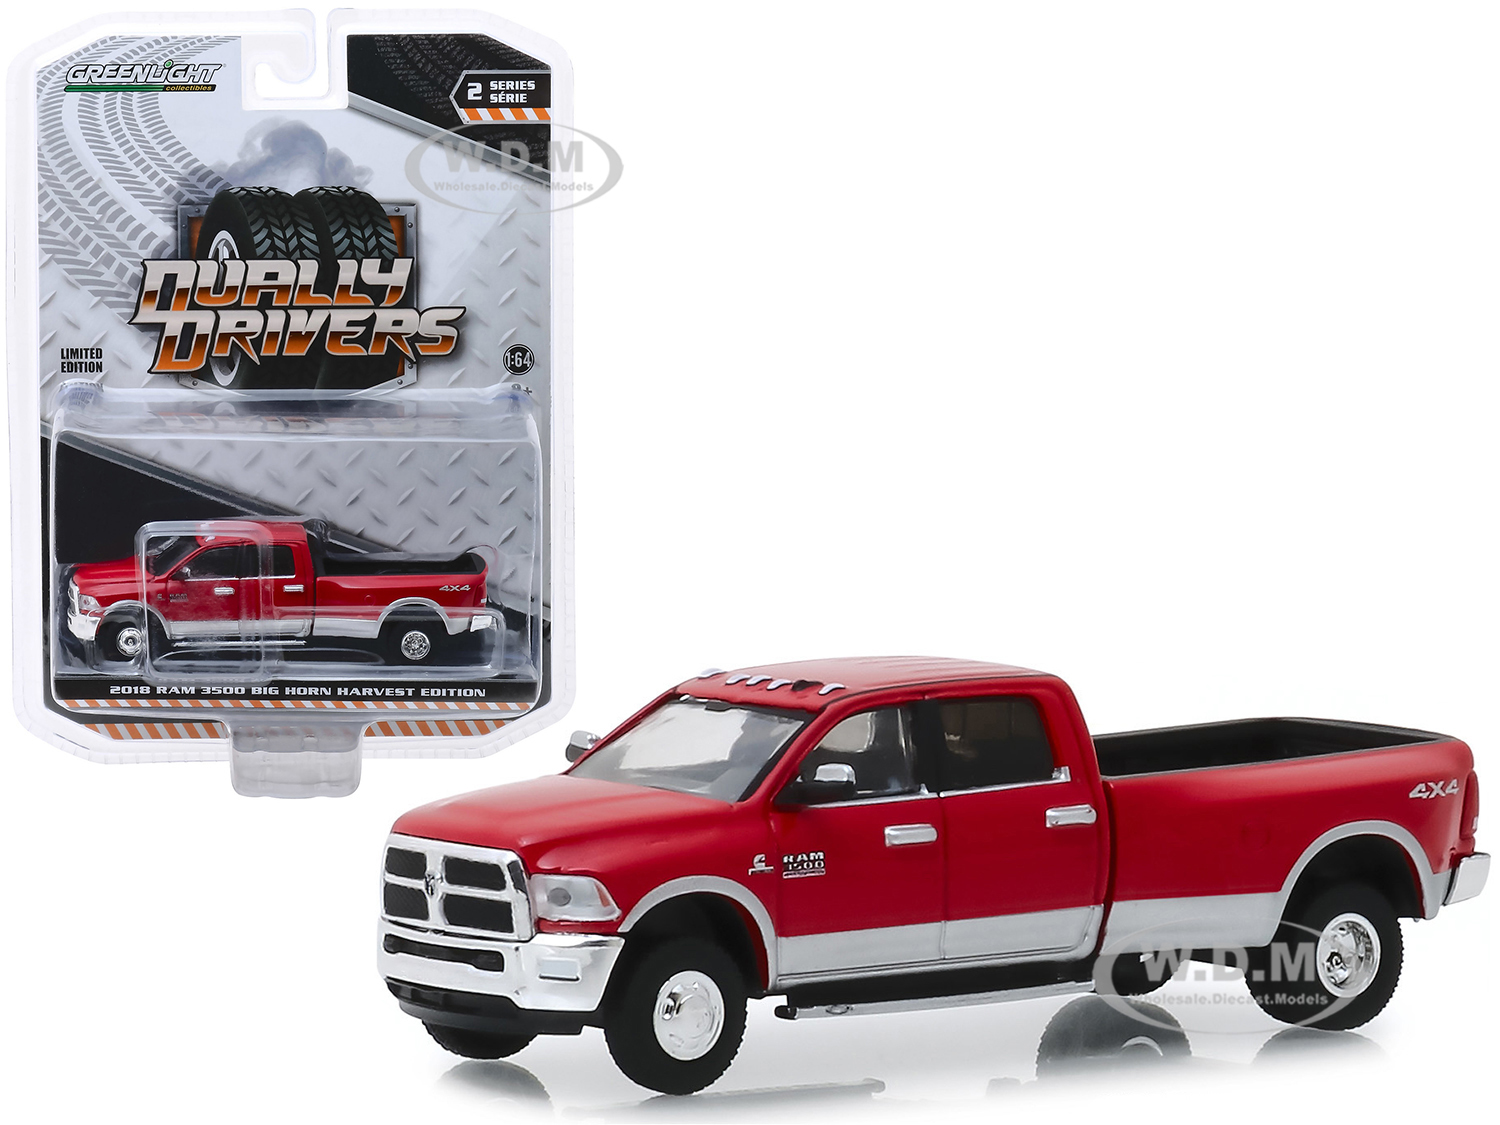 2018 Dodge Ram 3500 4x4 Big Horn Pickup Truck "harvest Edition" Red "dually Drivers" Series 2 1/64 Diecast Model Car By Greenlight